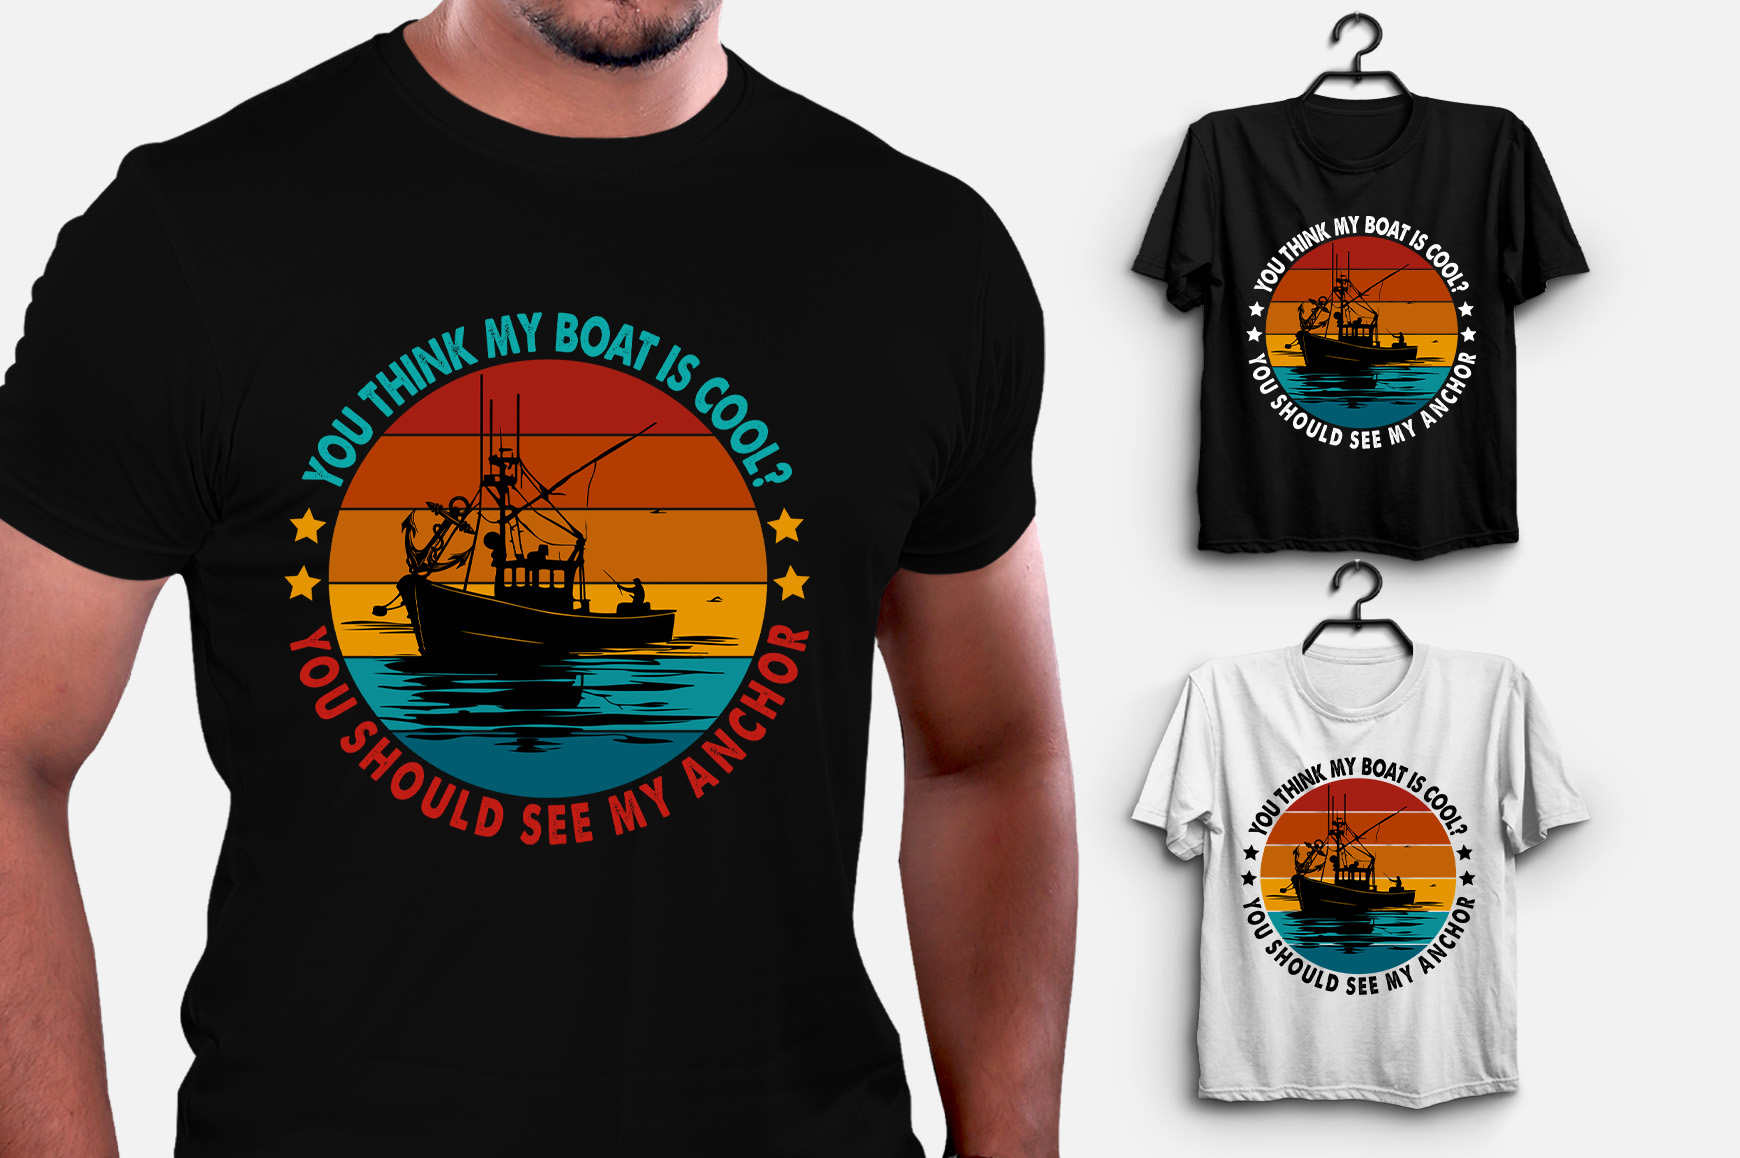 https://www.buytshirtdesigns.net/wp-content/uploads/2024/02/You-think-my-boat-is-cool-Fishing-Boat-T-Shirt-Design-1.jpg